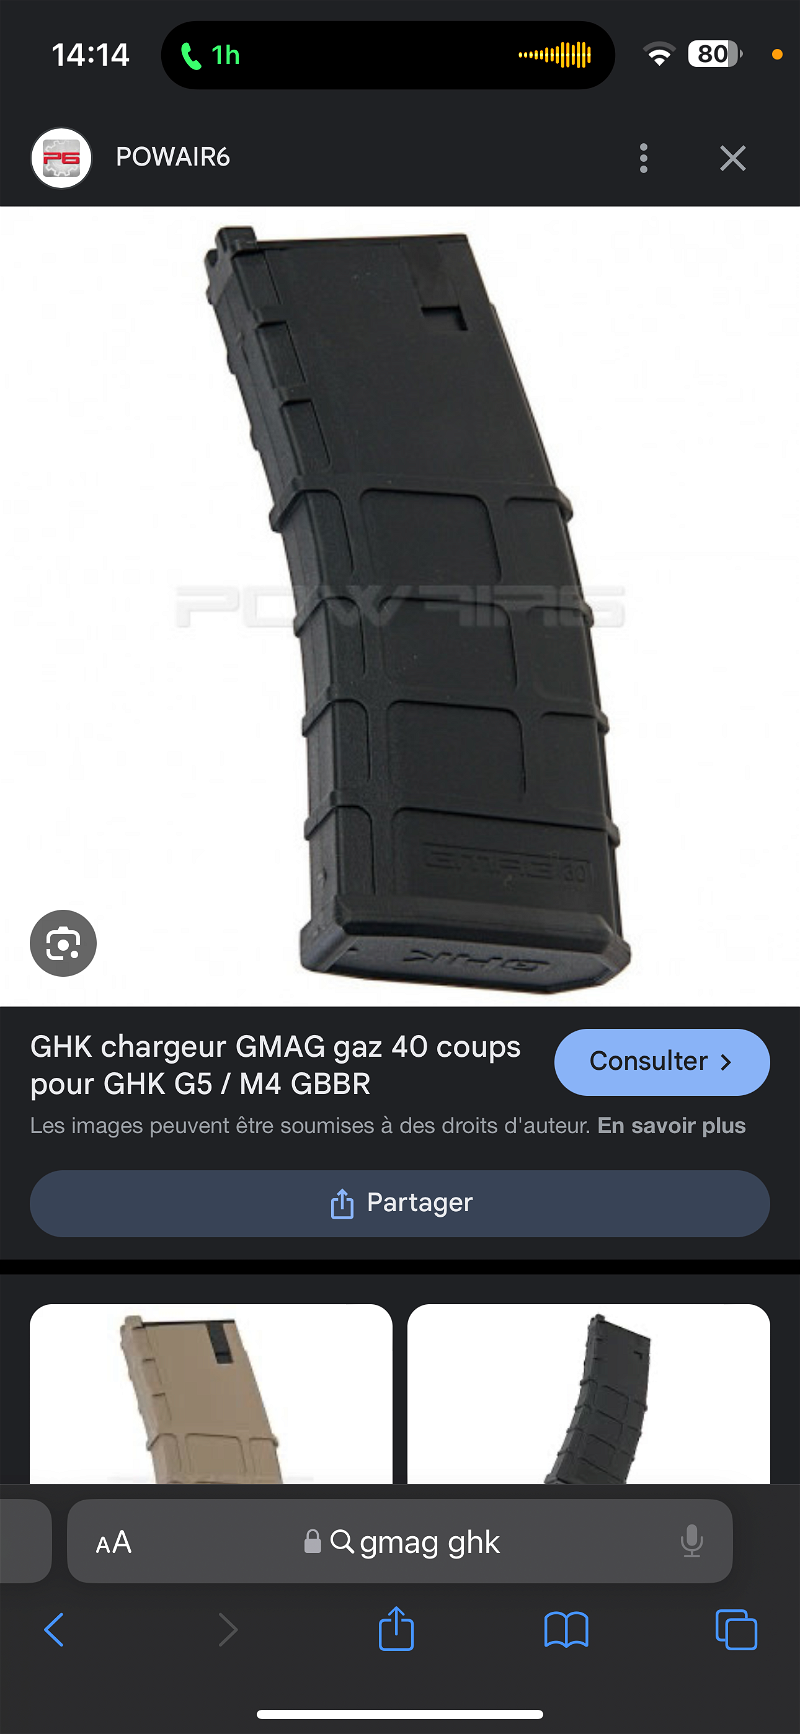 Image 1 for Recherche/looking pour/for ghk gmag for G5